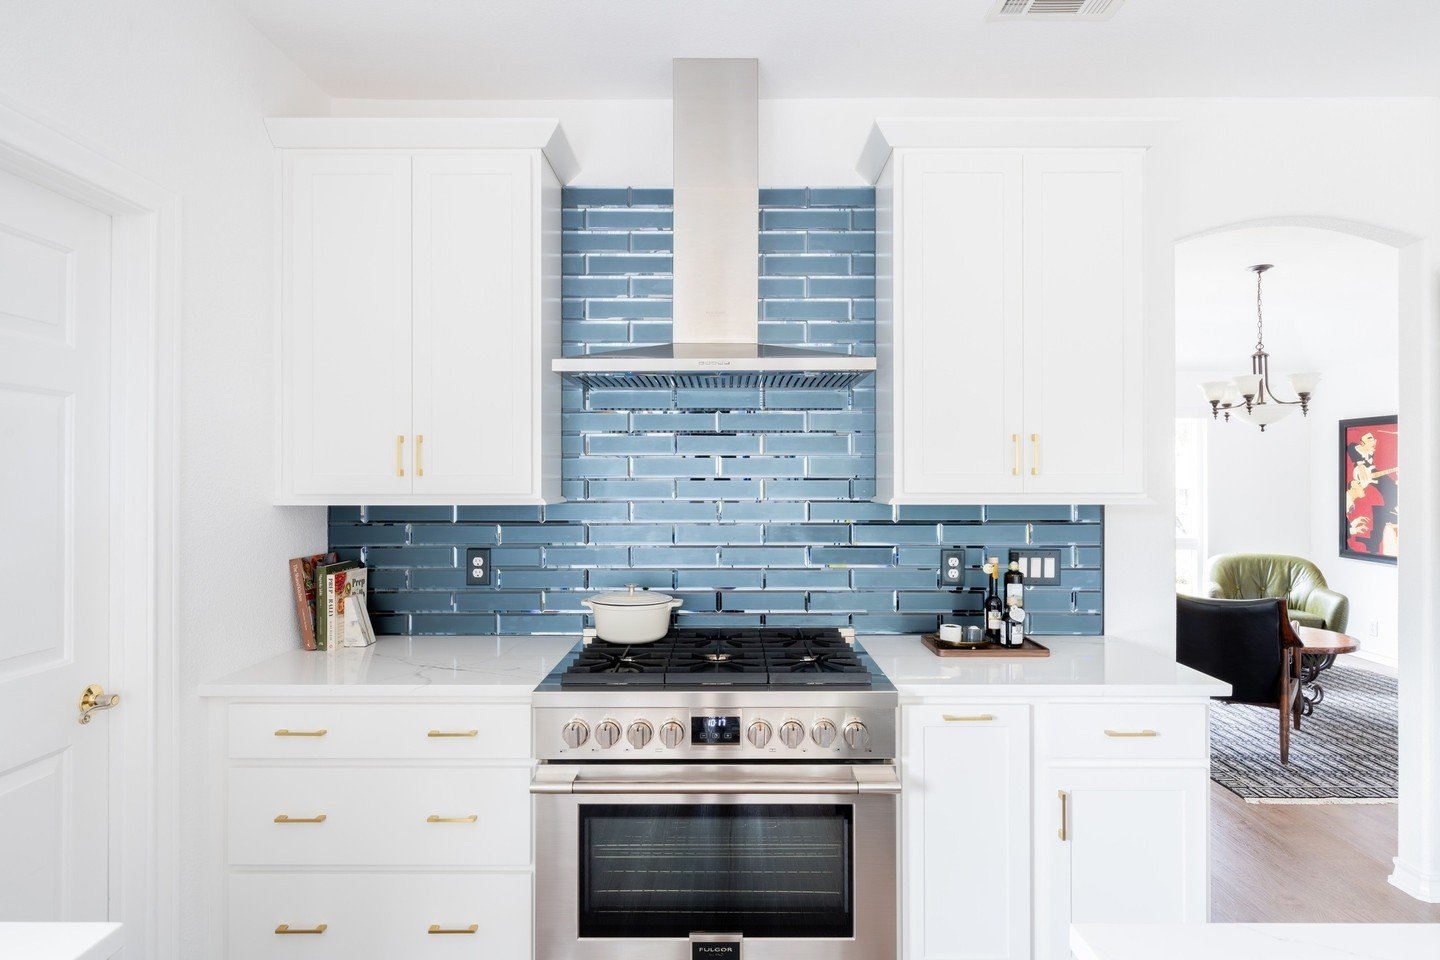 Breathe life into your kitchen with the latest trend of bold colors&mdash;without overwhelming your space. Opt for a vibrant backsplash as your statement piece, just like this stunning shade of blue, balanced beautifully with neutral cabinetry. It's 